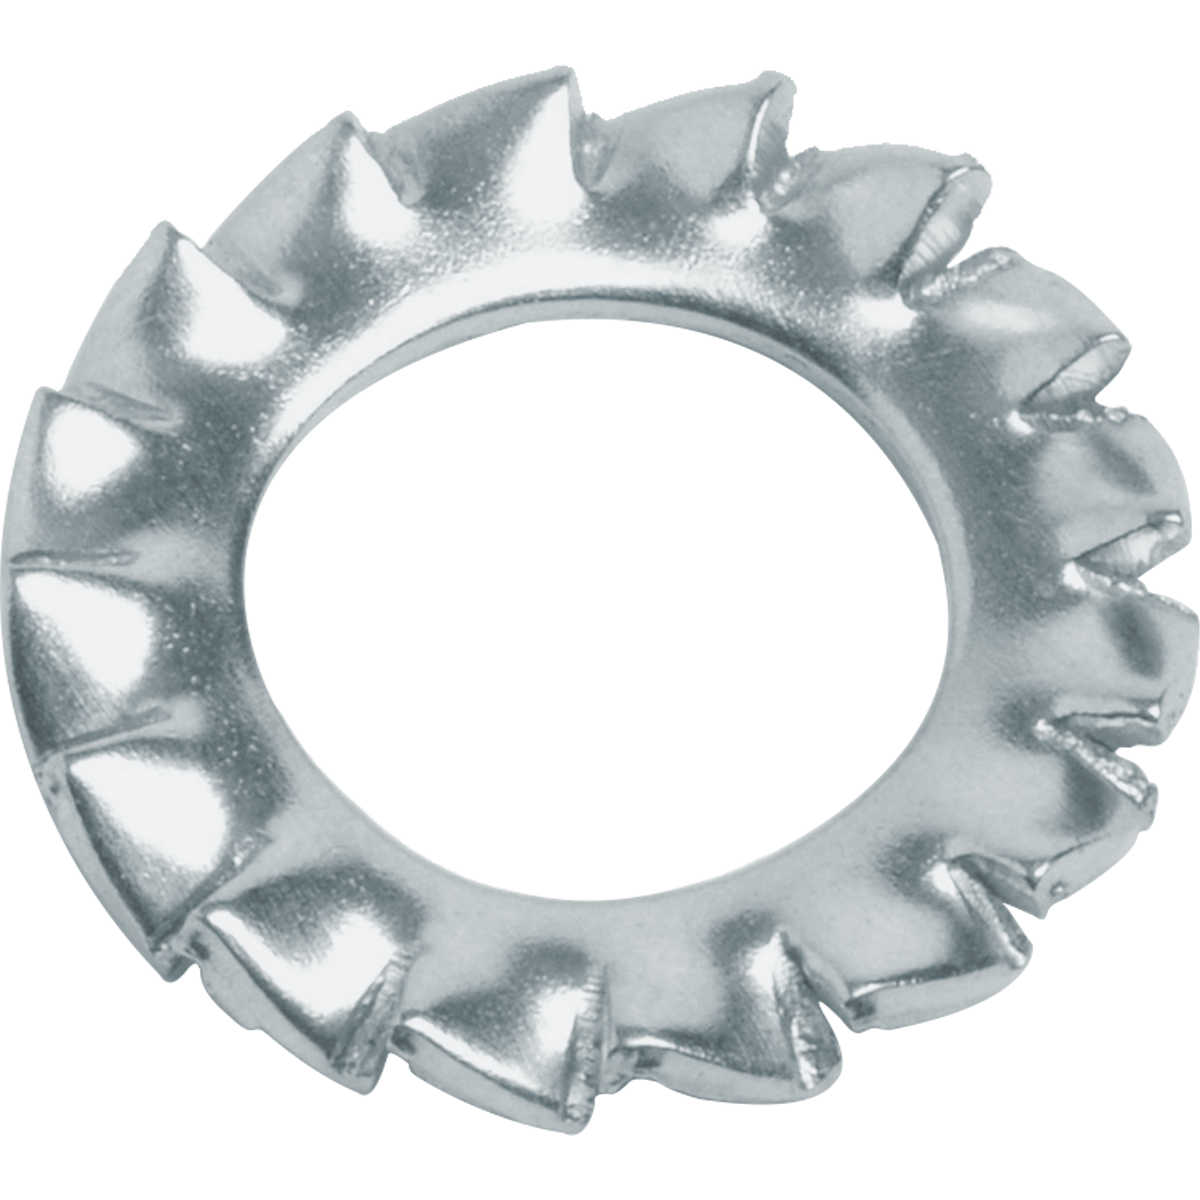 Externally serrated washers. Also known as shake-proof washers, serrated lock washers, or tooth lock washers.